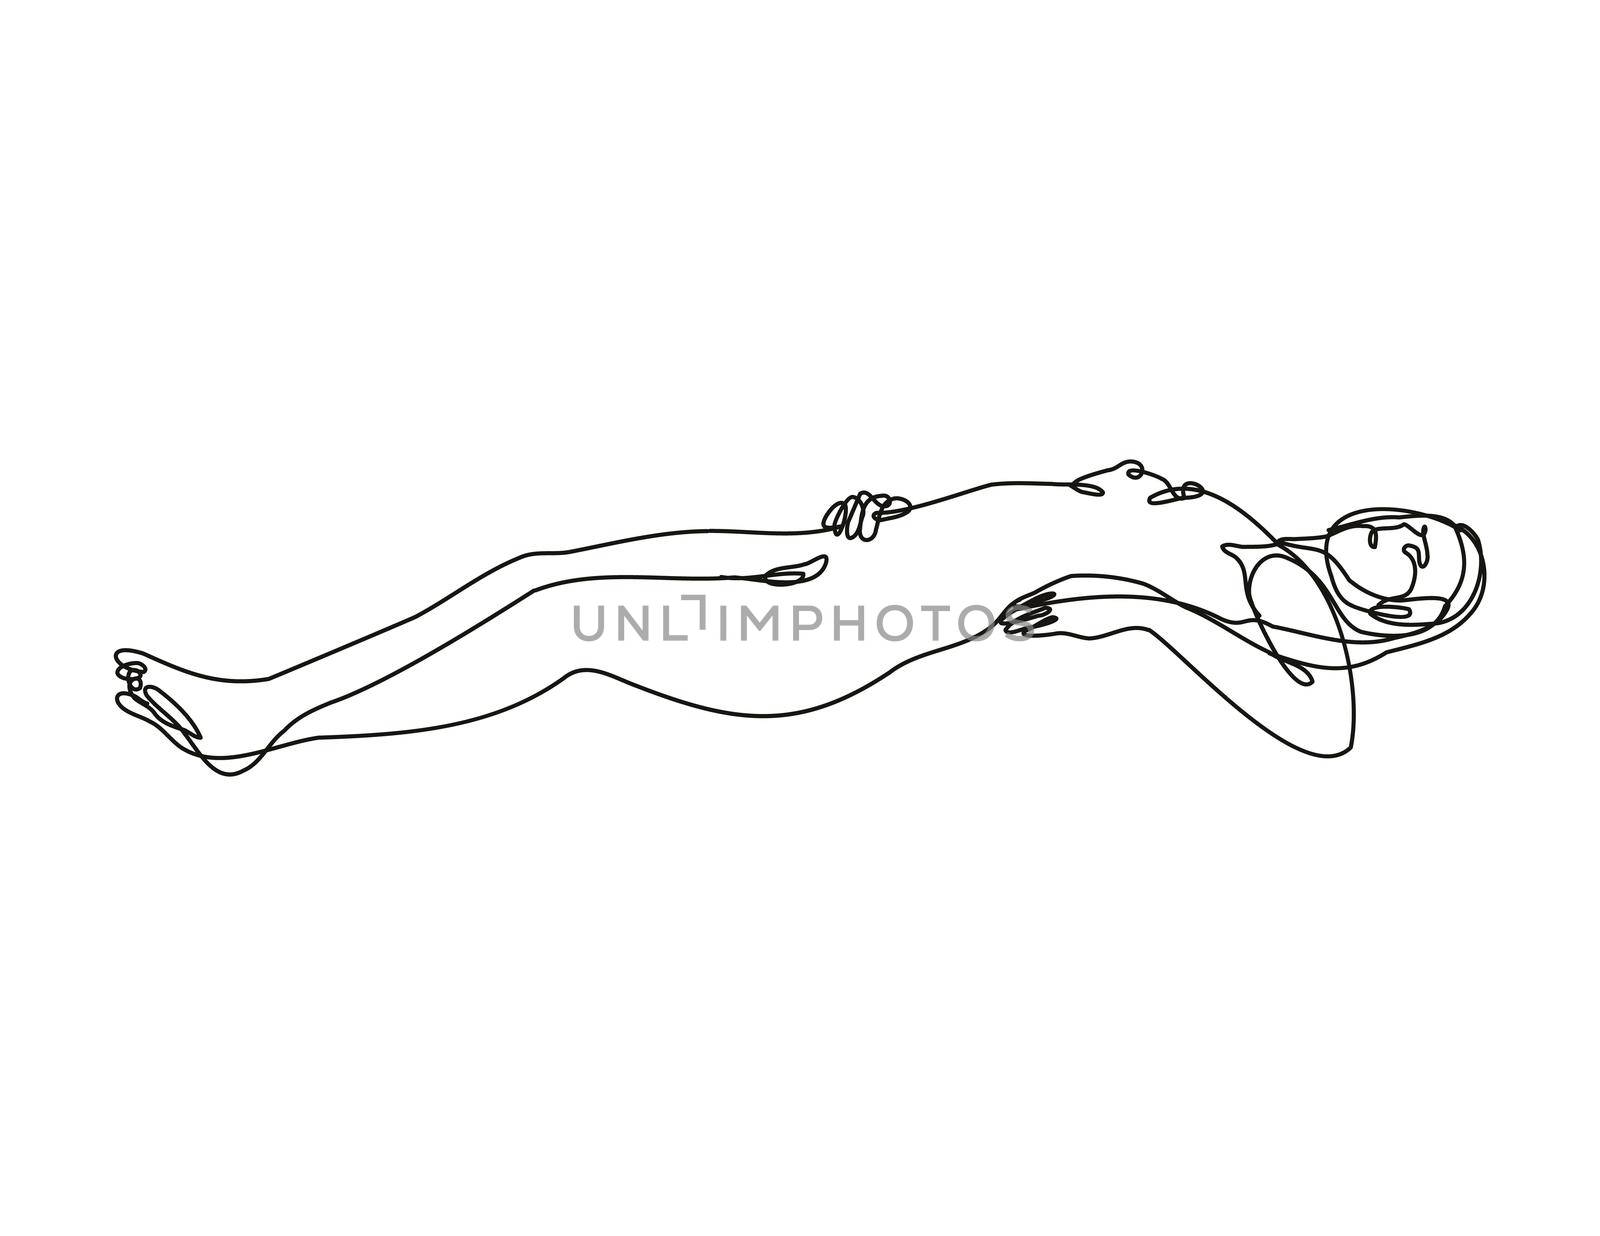 Female Nude Lying on Back or Supine Position Continuous Line Doodle Drawing by patrimonio